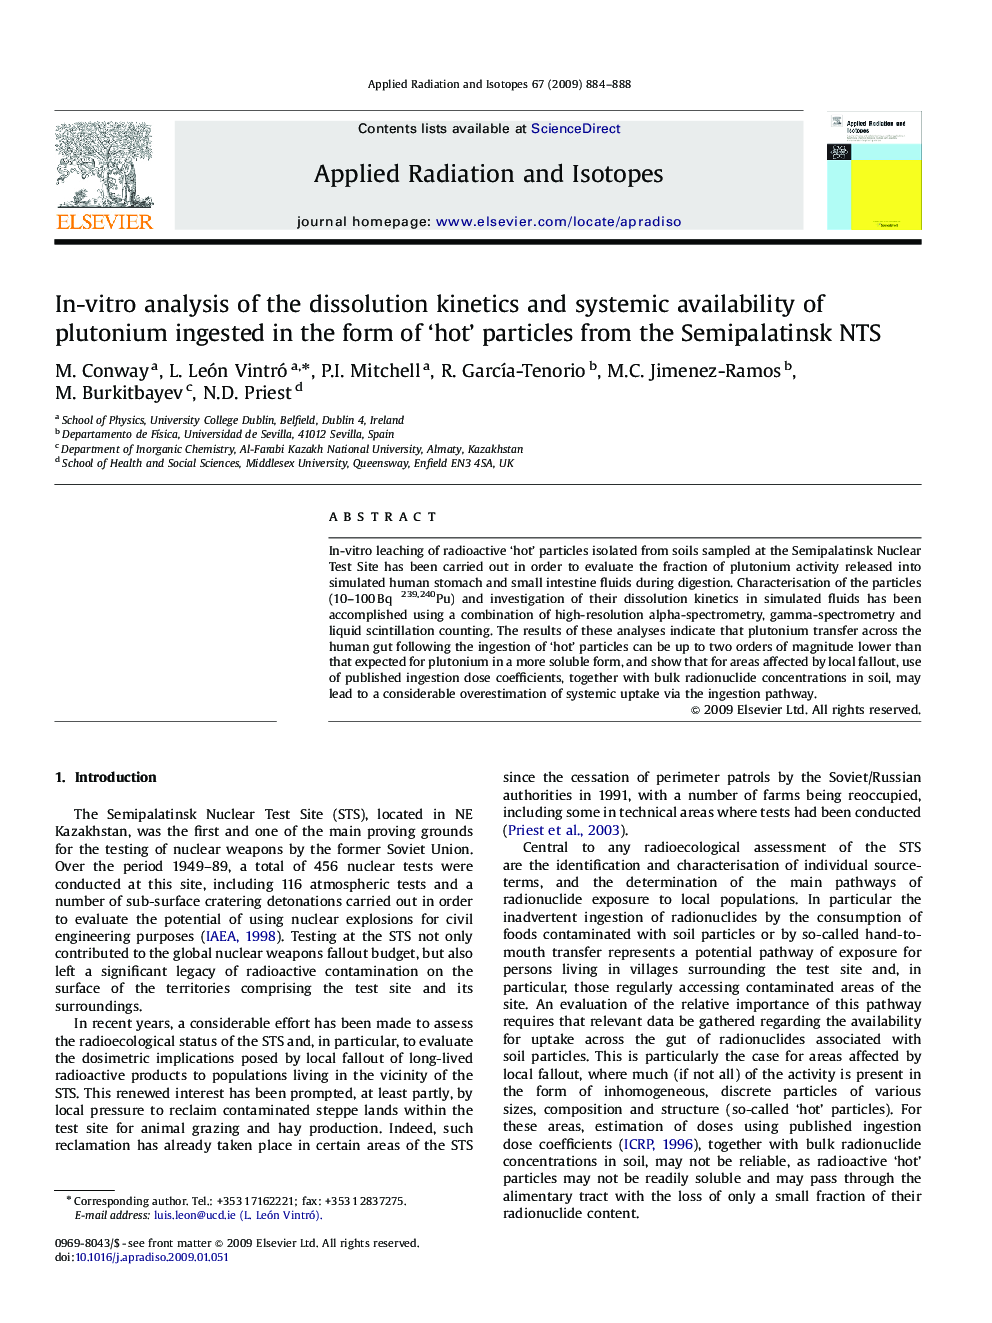 In-vitro analysis of the dissolution kinetics and systemic availability of plutonium ingested in the form of 'hot' particles from the Semipalatinsk NTS